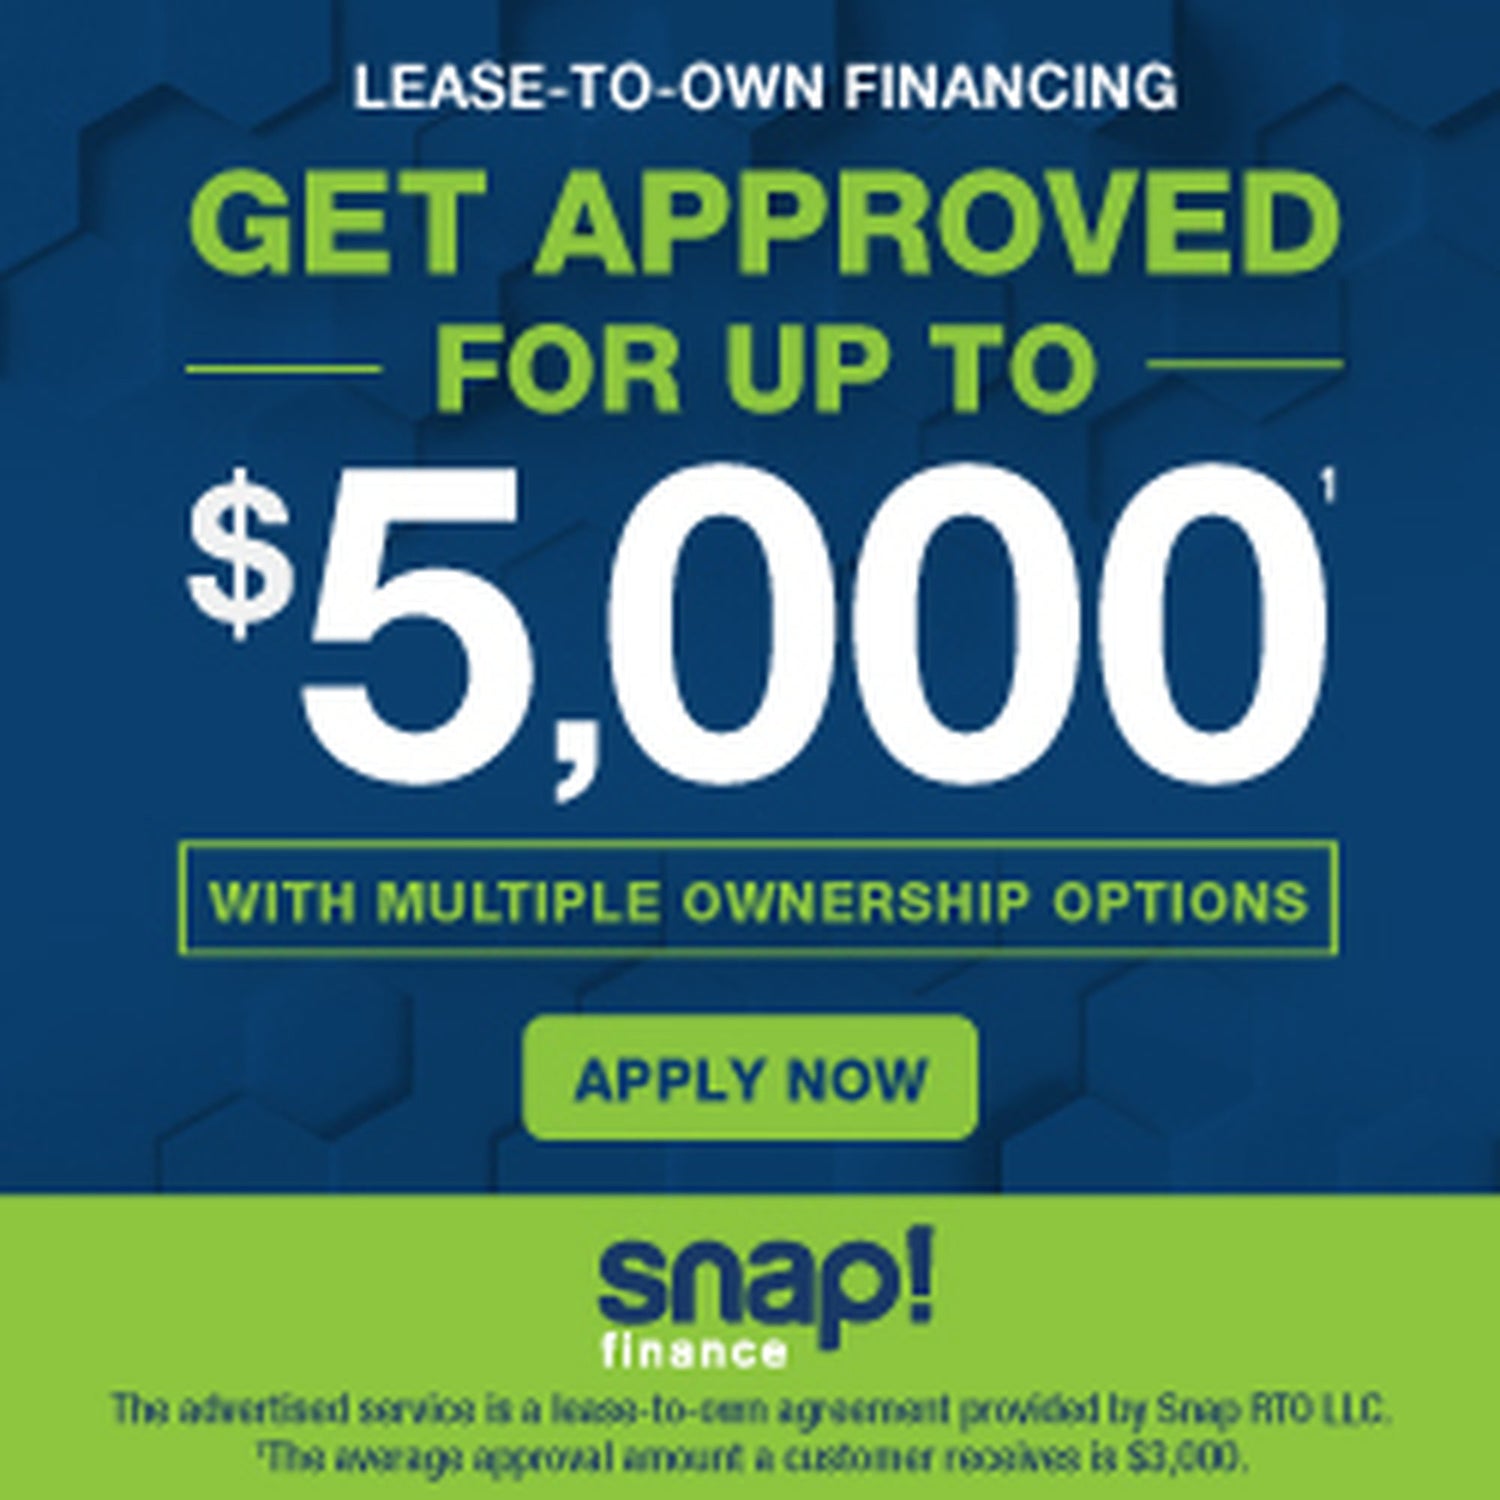 LEASE-TO-OWN